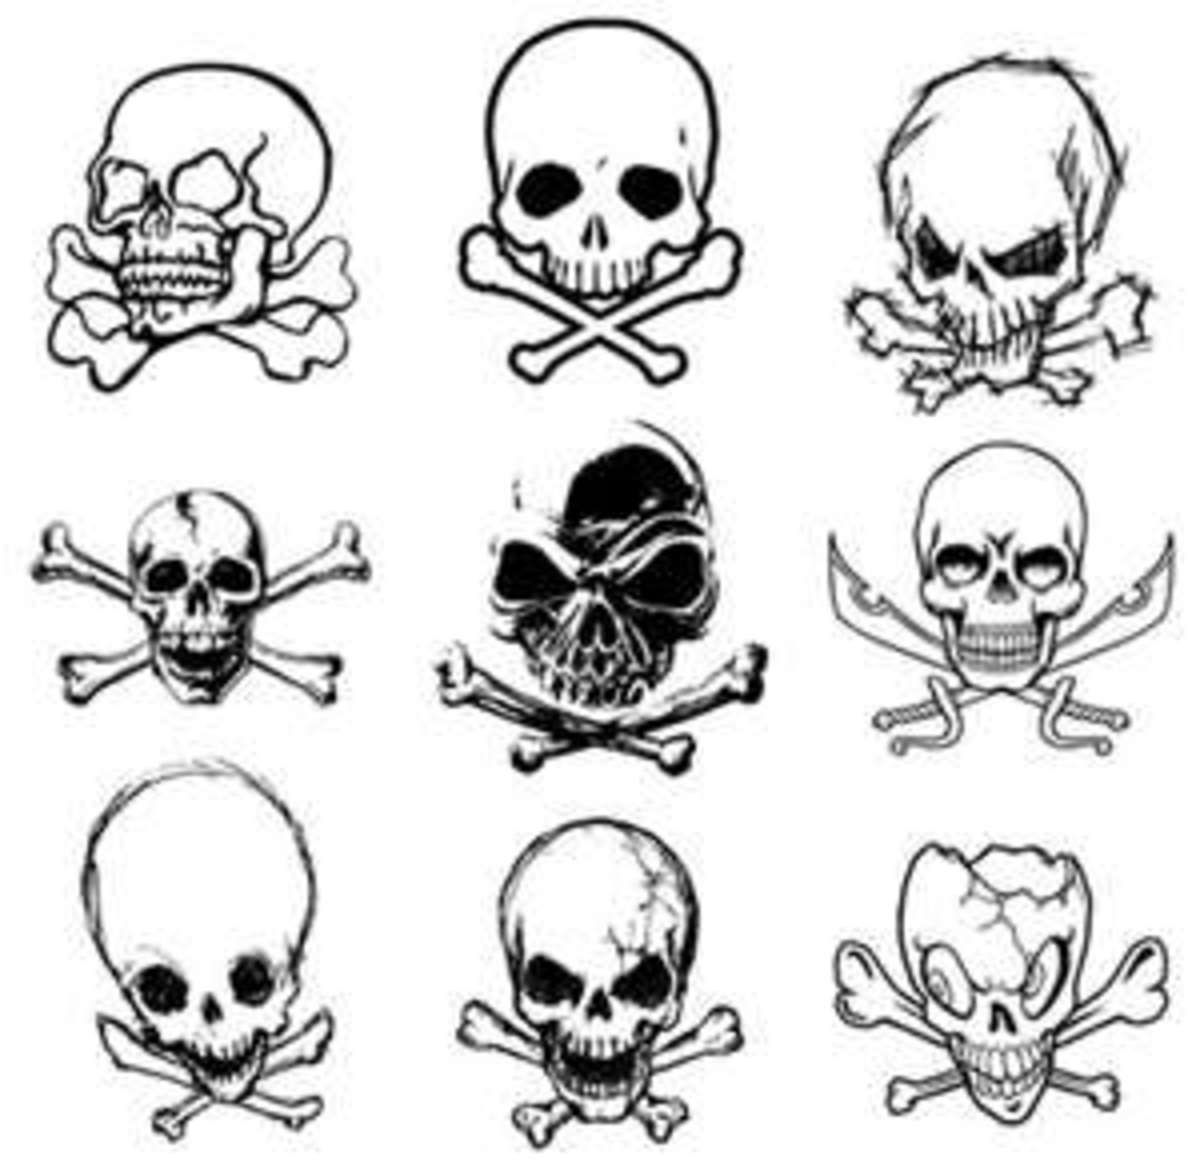 20 Bull Skull Tattoos To Grab By The Horns • Body Artifact